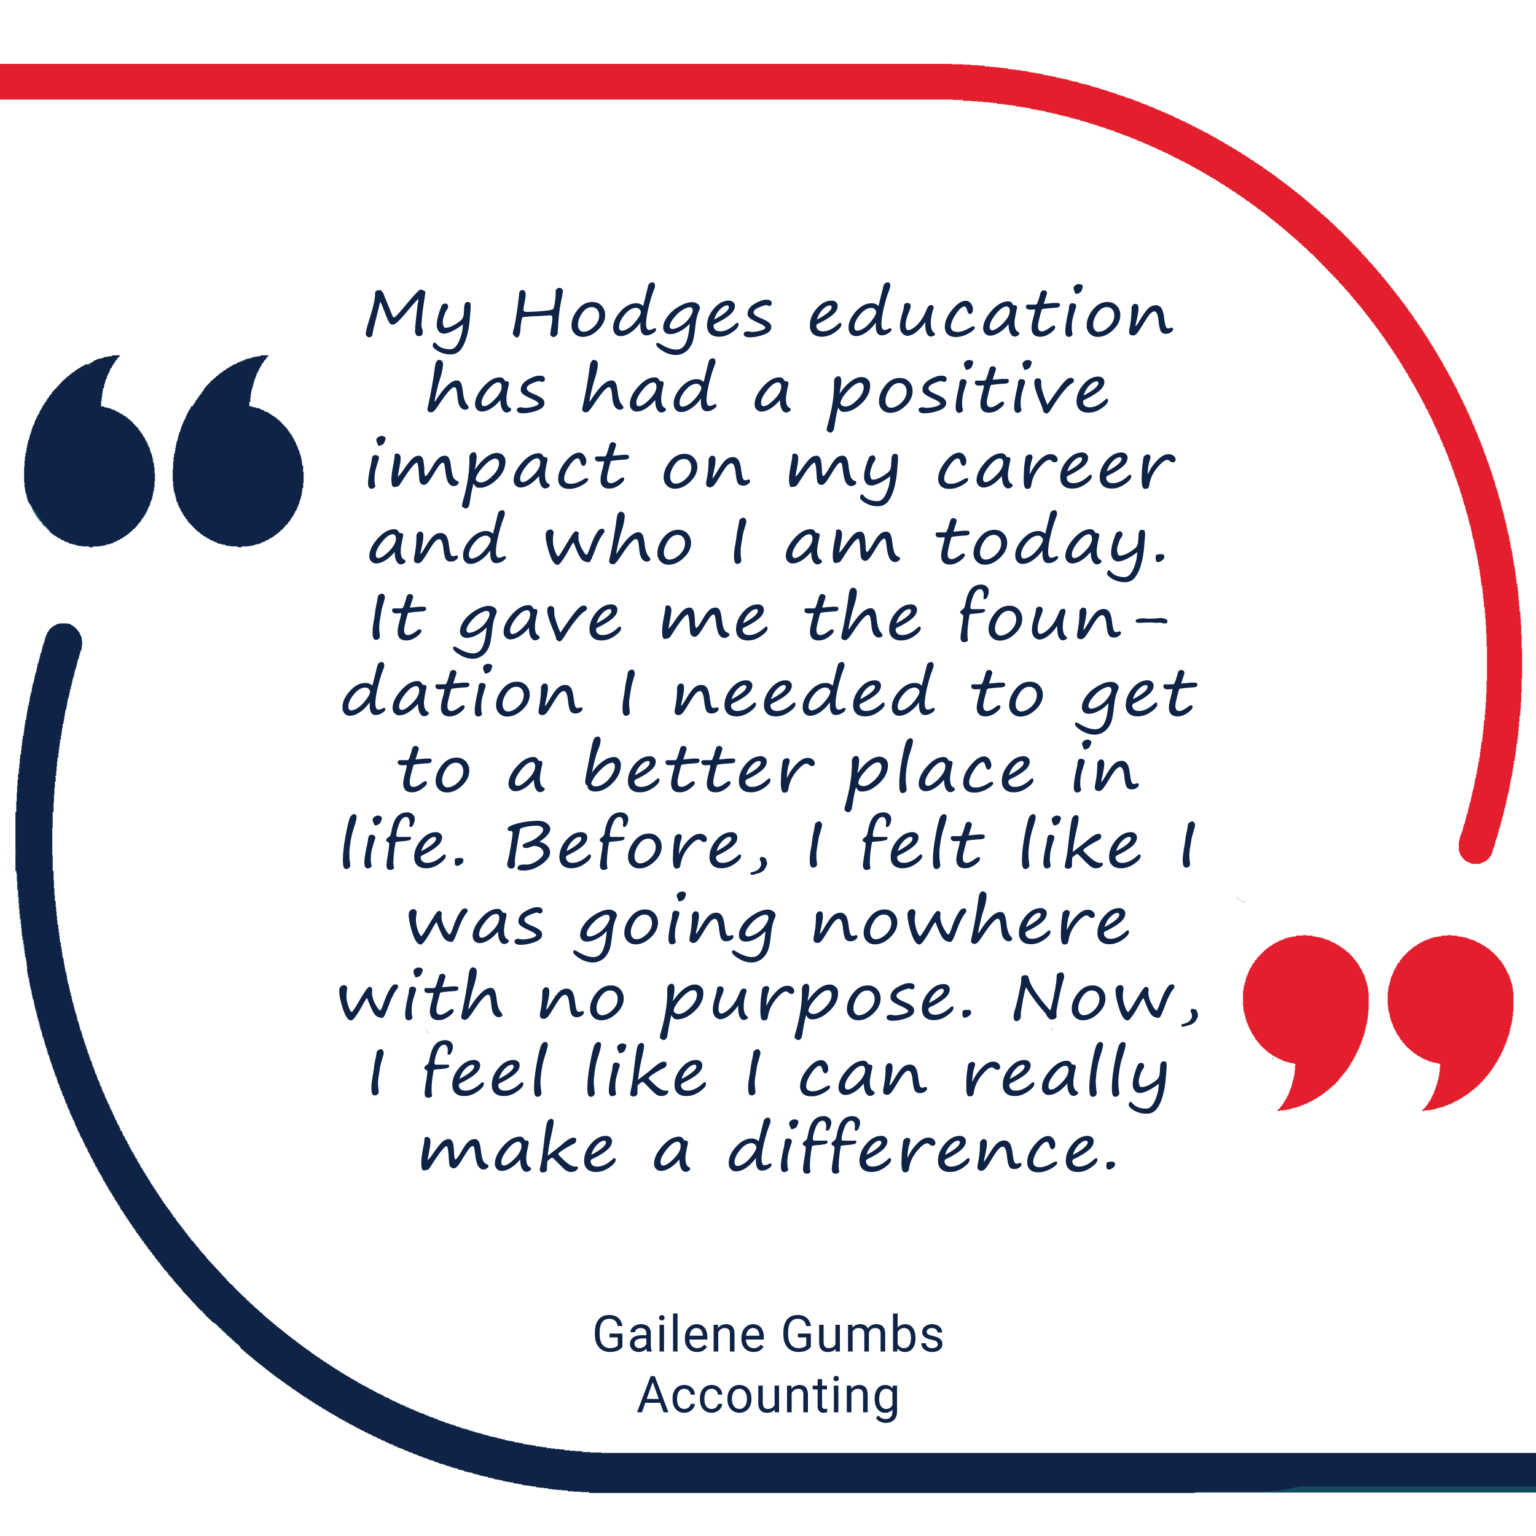 Quote from Gailene a hodges graduate